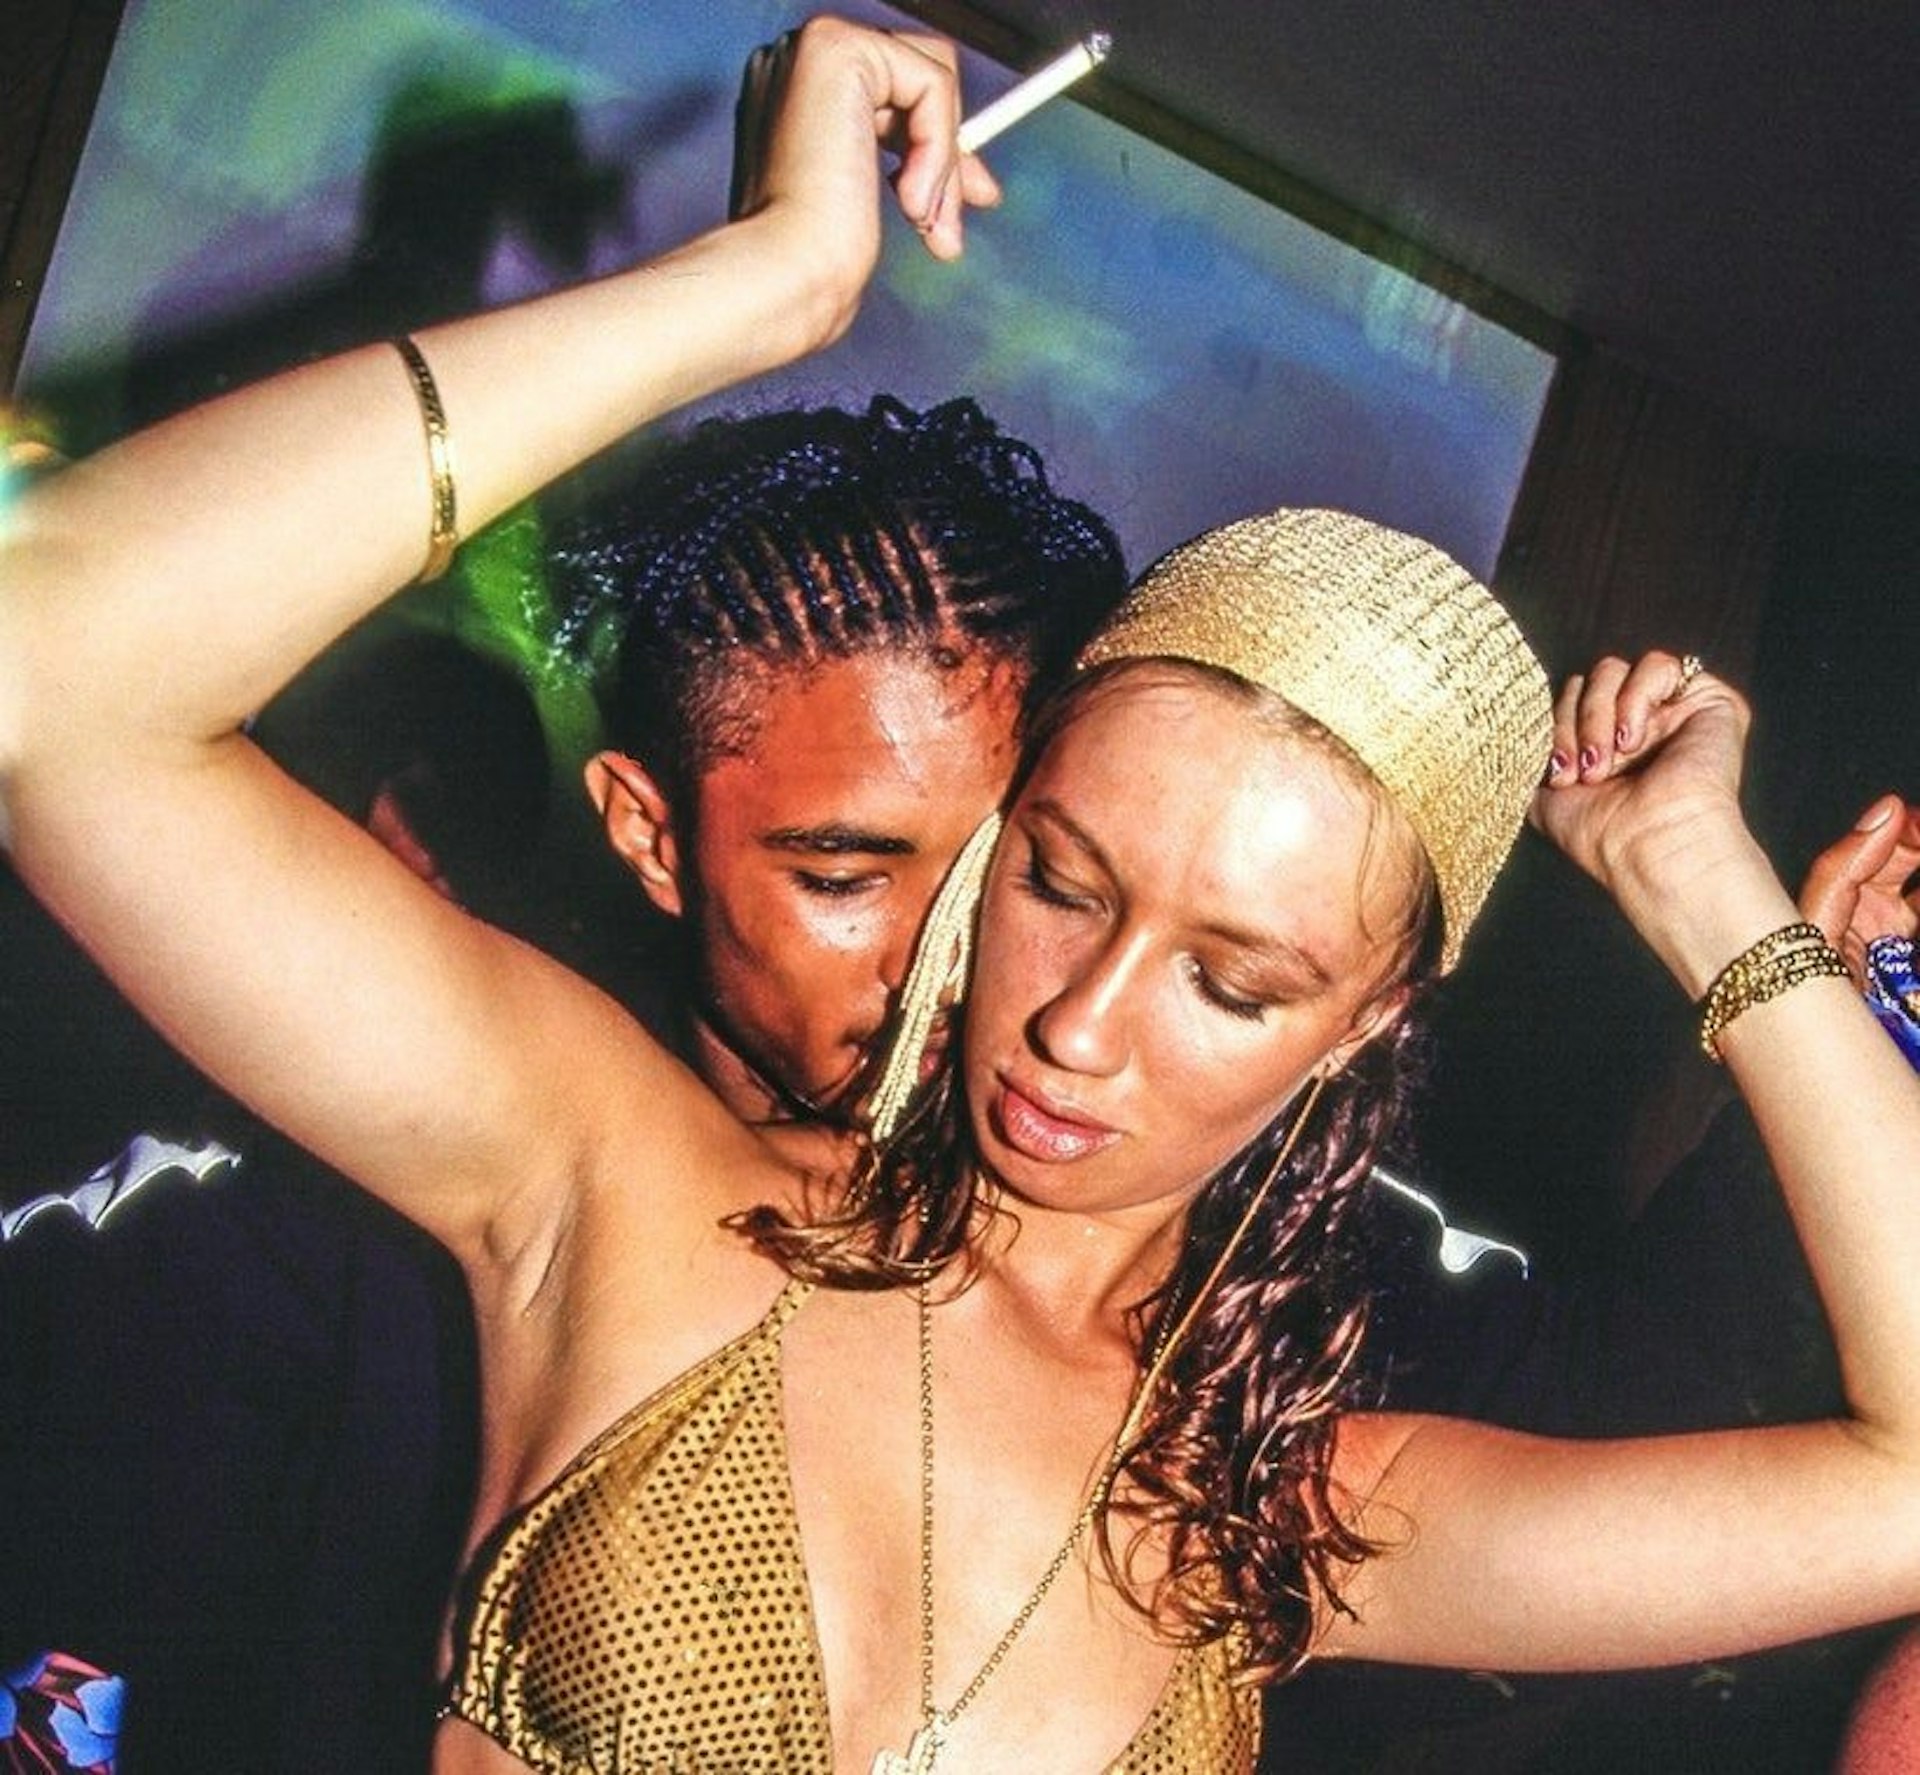 An electrifying portrait of rave culture in the early noughties